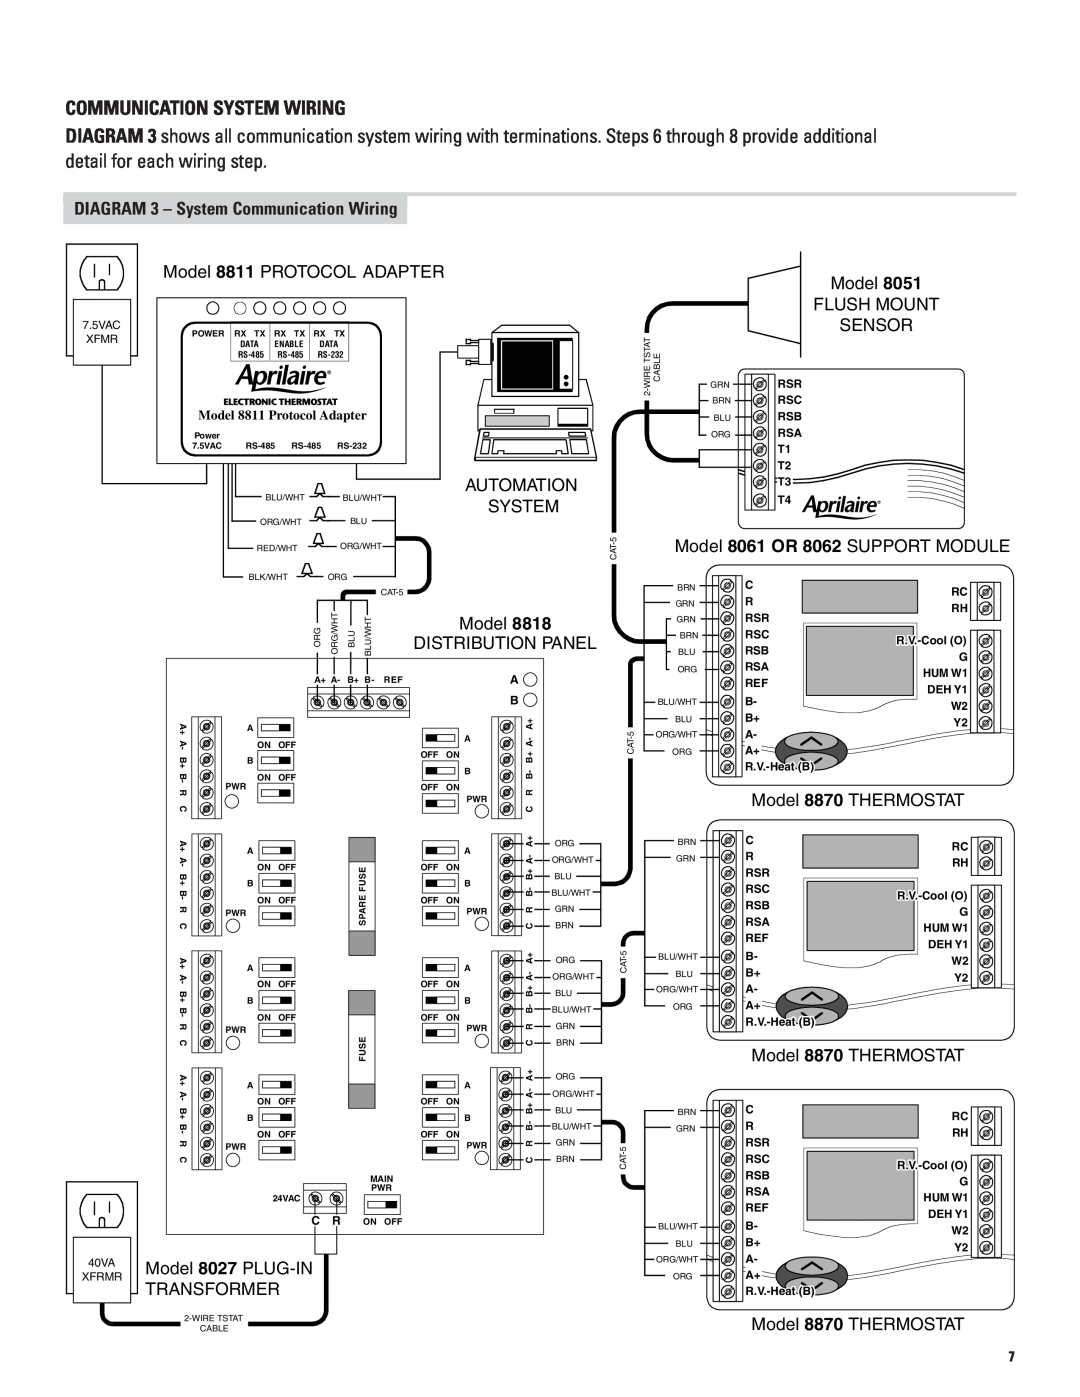 Echo 8870 DIAGRAM 3 - System Communication Wiring, Model 8811 PROTOCOL ADAPTER, Automation, Distribution Panel 